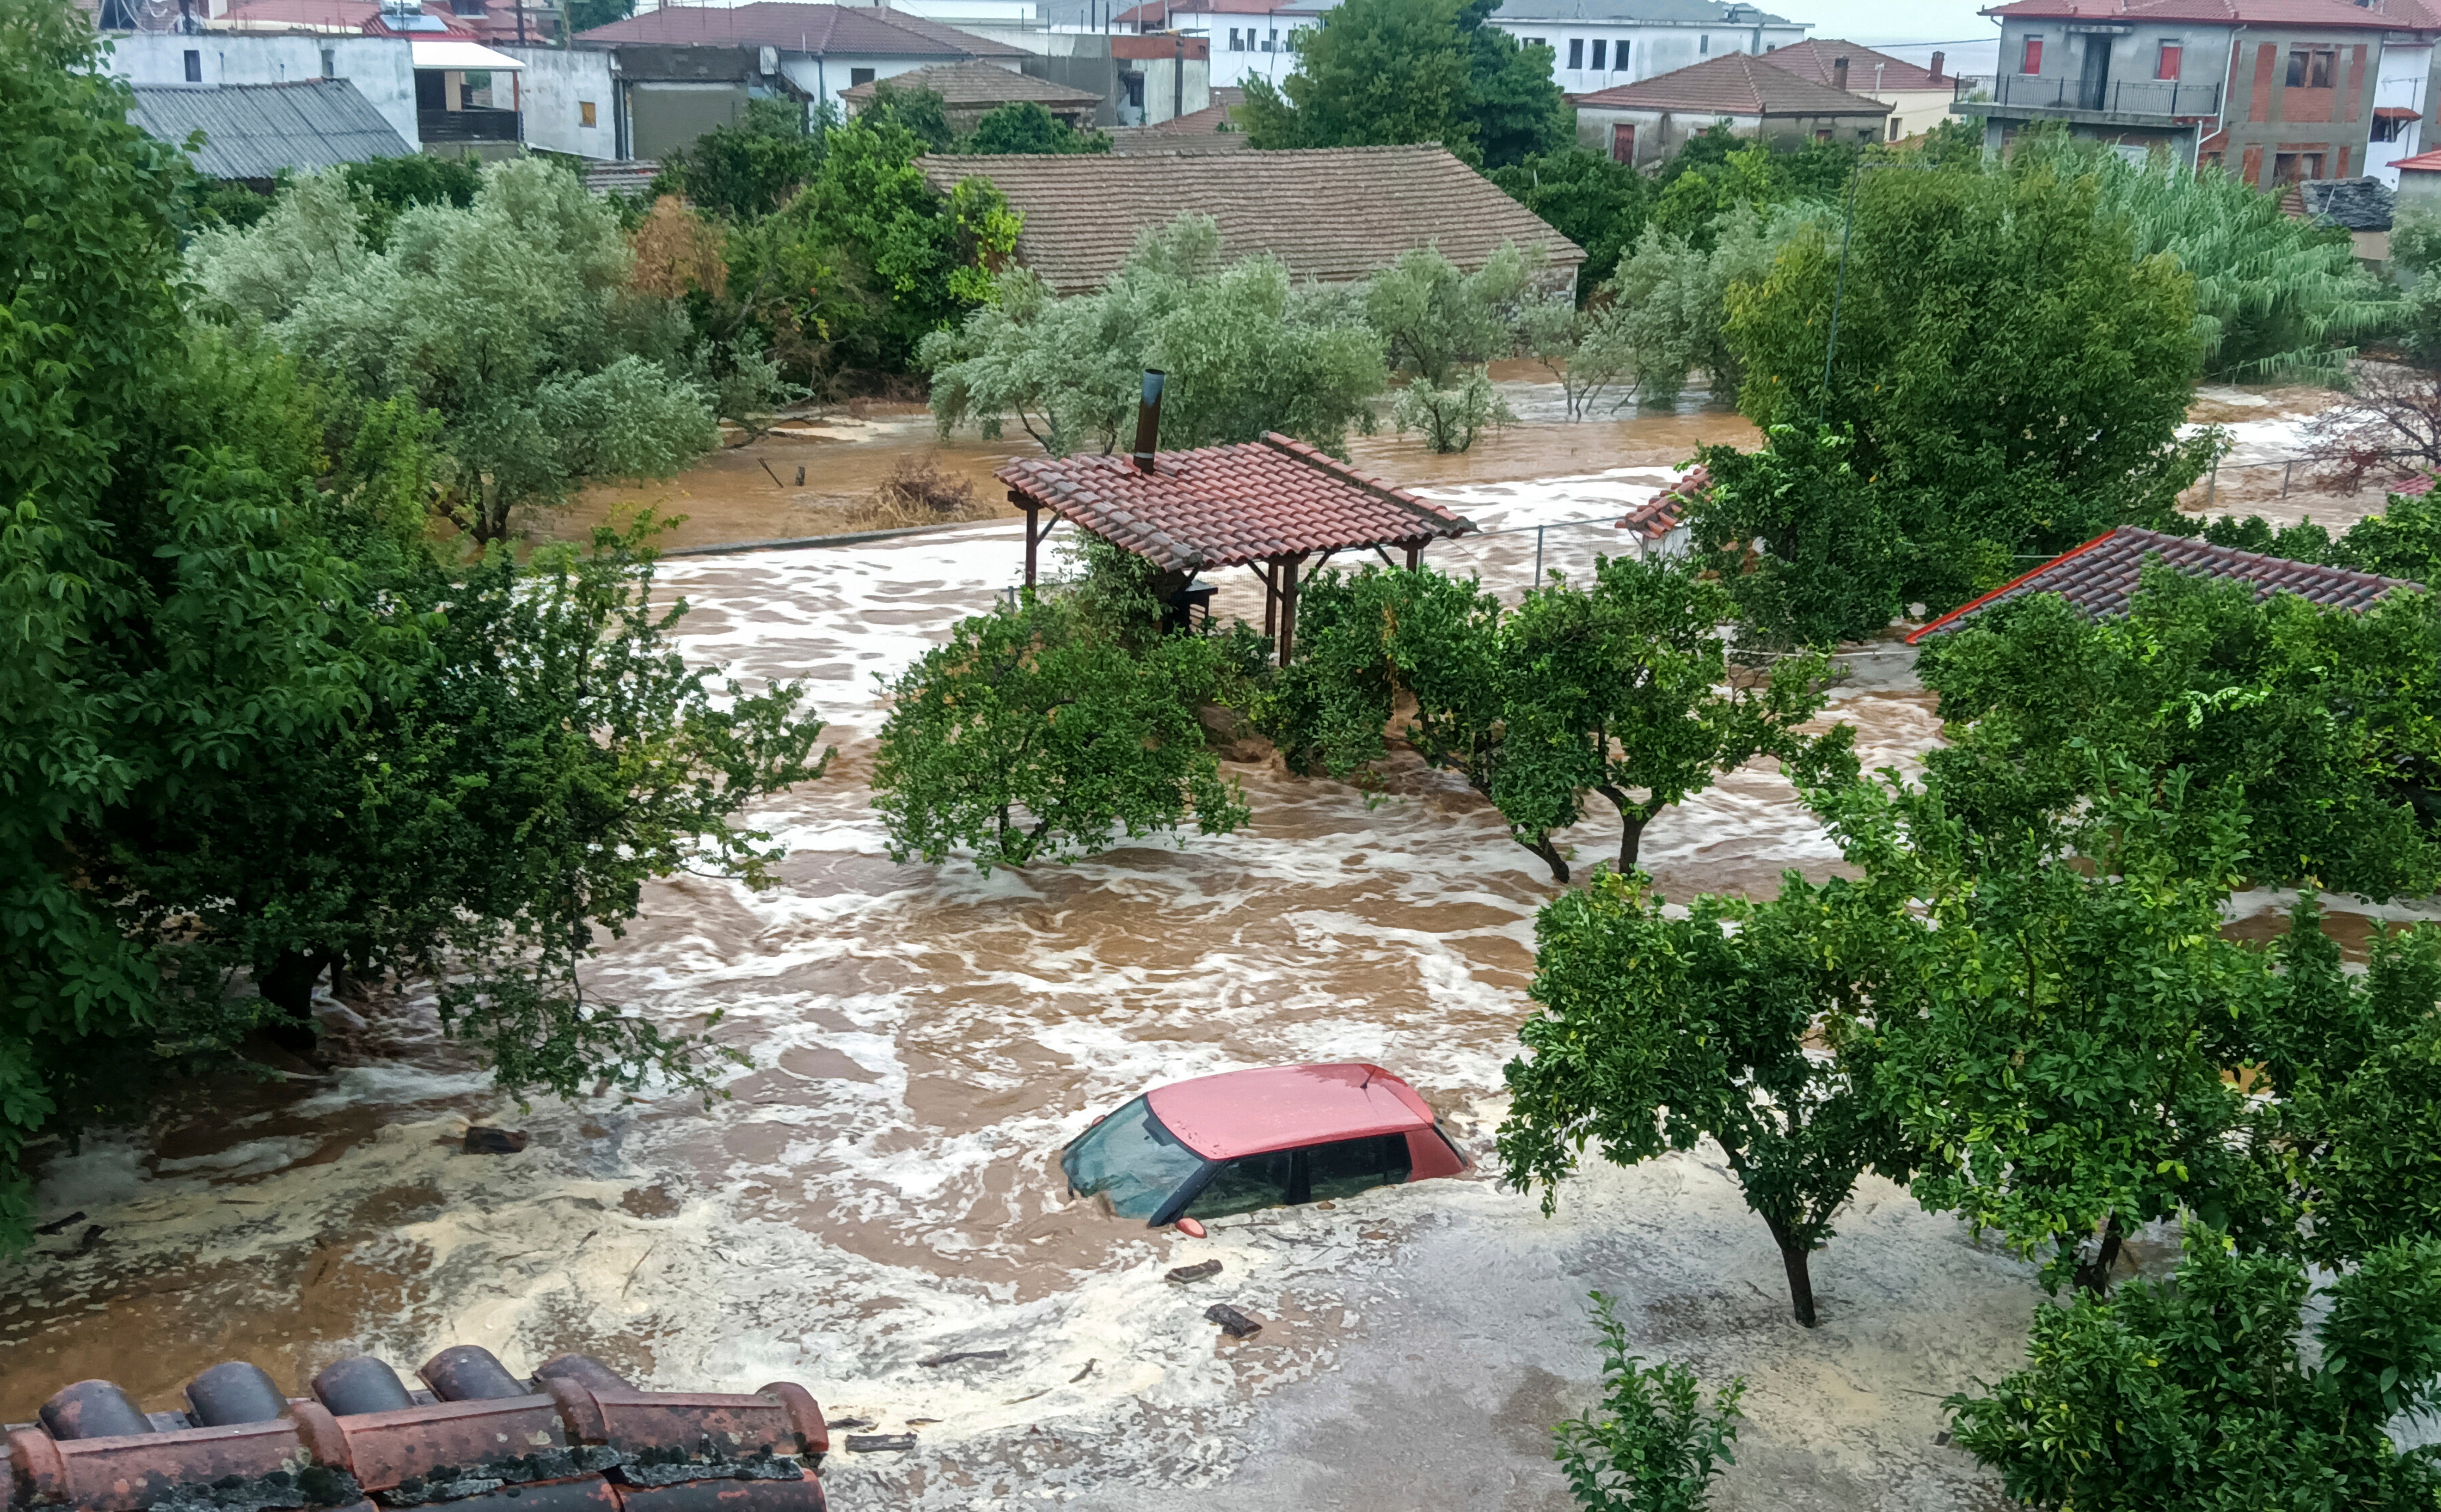 At least 5 people die as severe rainstorms trigger flooding in Greece, Turkey and Bulgaria The Independent pic image